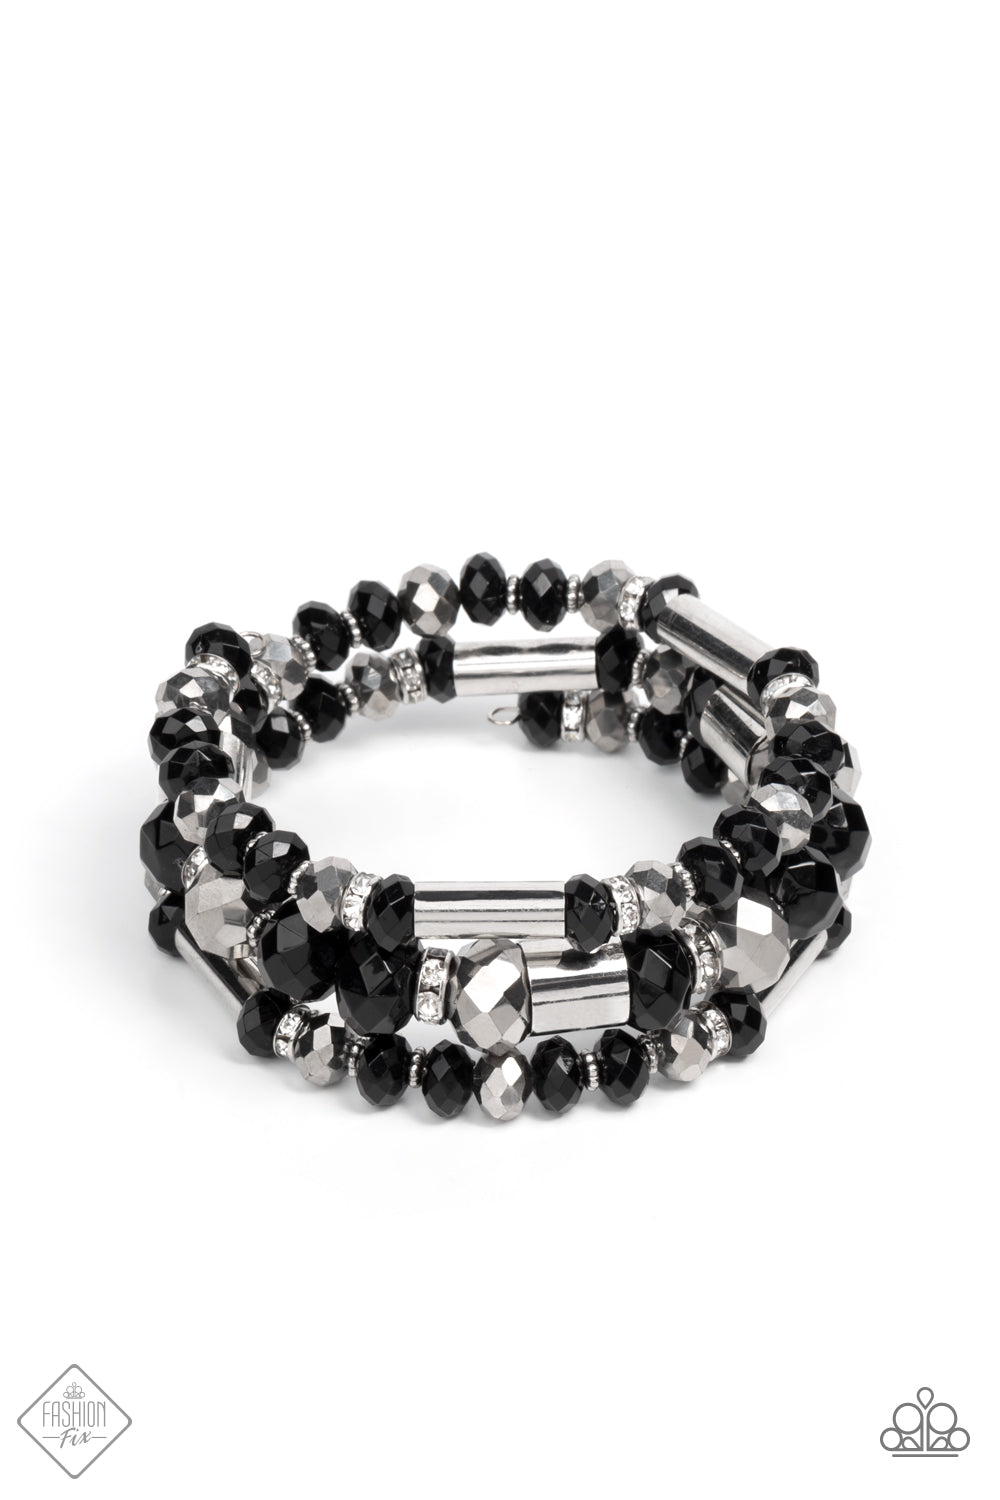 Dynamic Dazzle Black Coil Bracelet - Paparazzi Accessories  Stacks of black and silver faceted beads, interspersed with silver cylindrical accents and rhinestone-encrusted beads, are threaded along an infinity wrap-style bracelet making an intensely dynamic statement around the wrist.  Sold as one individual bracelet.